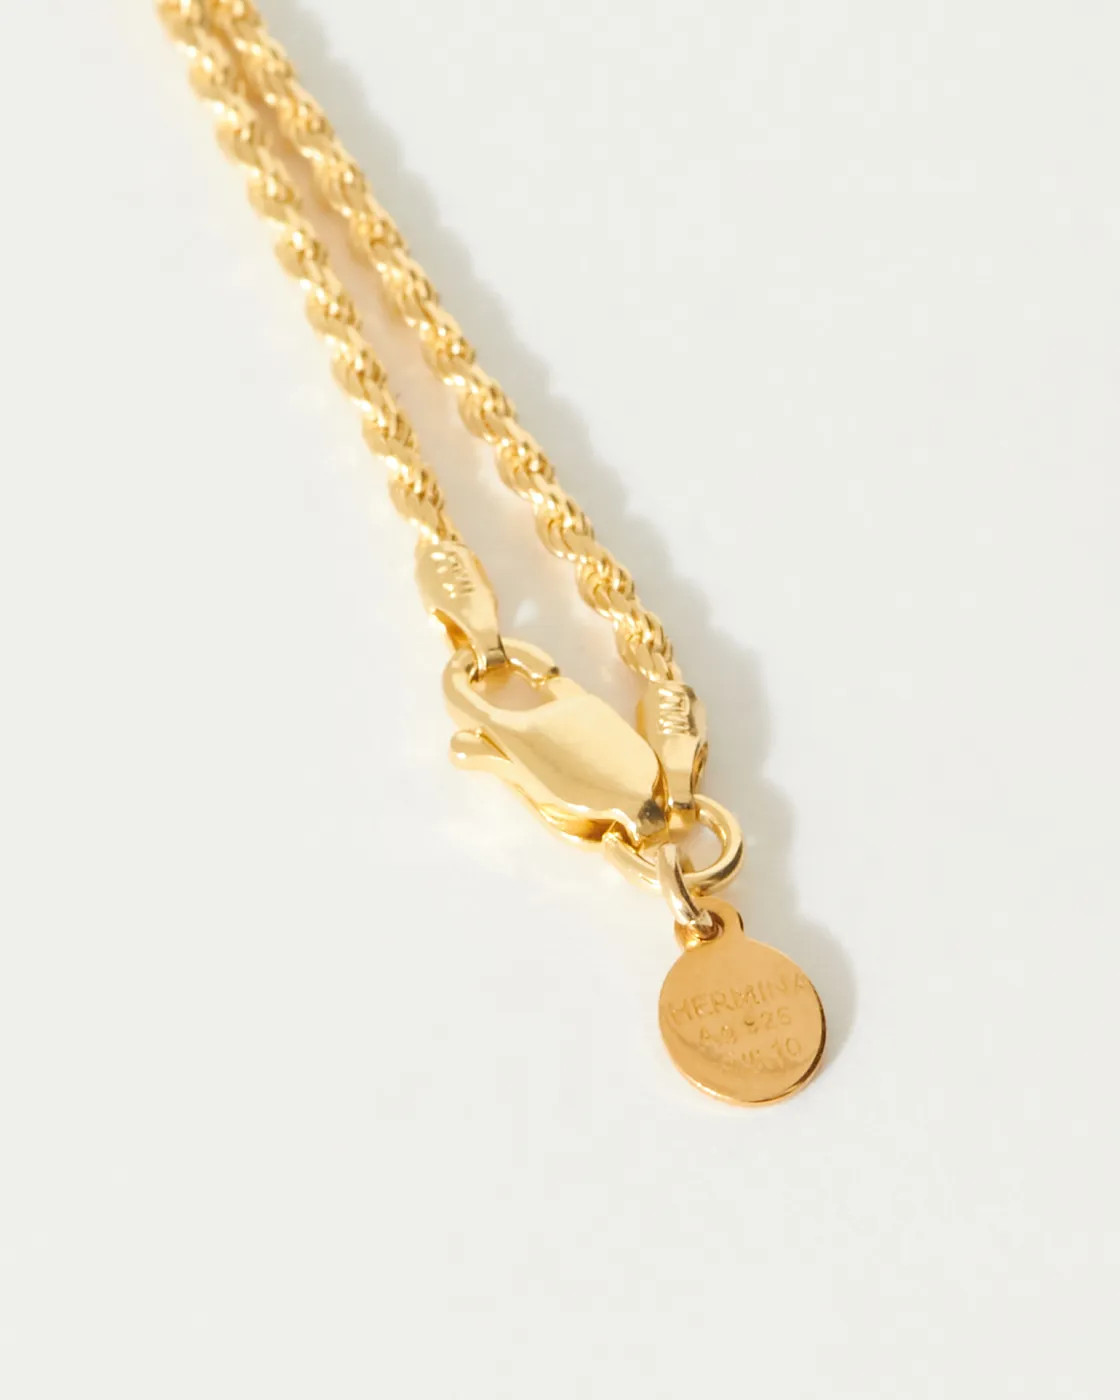 Long Gold Cord Chain with Pearl Charm